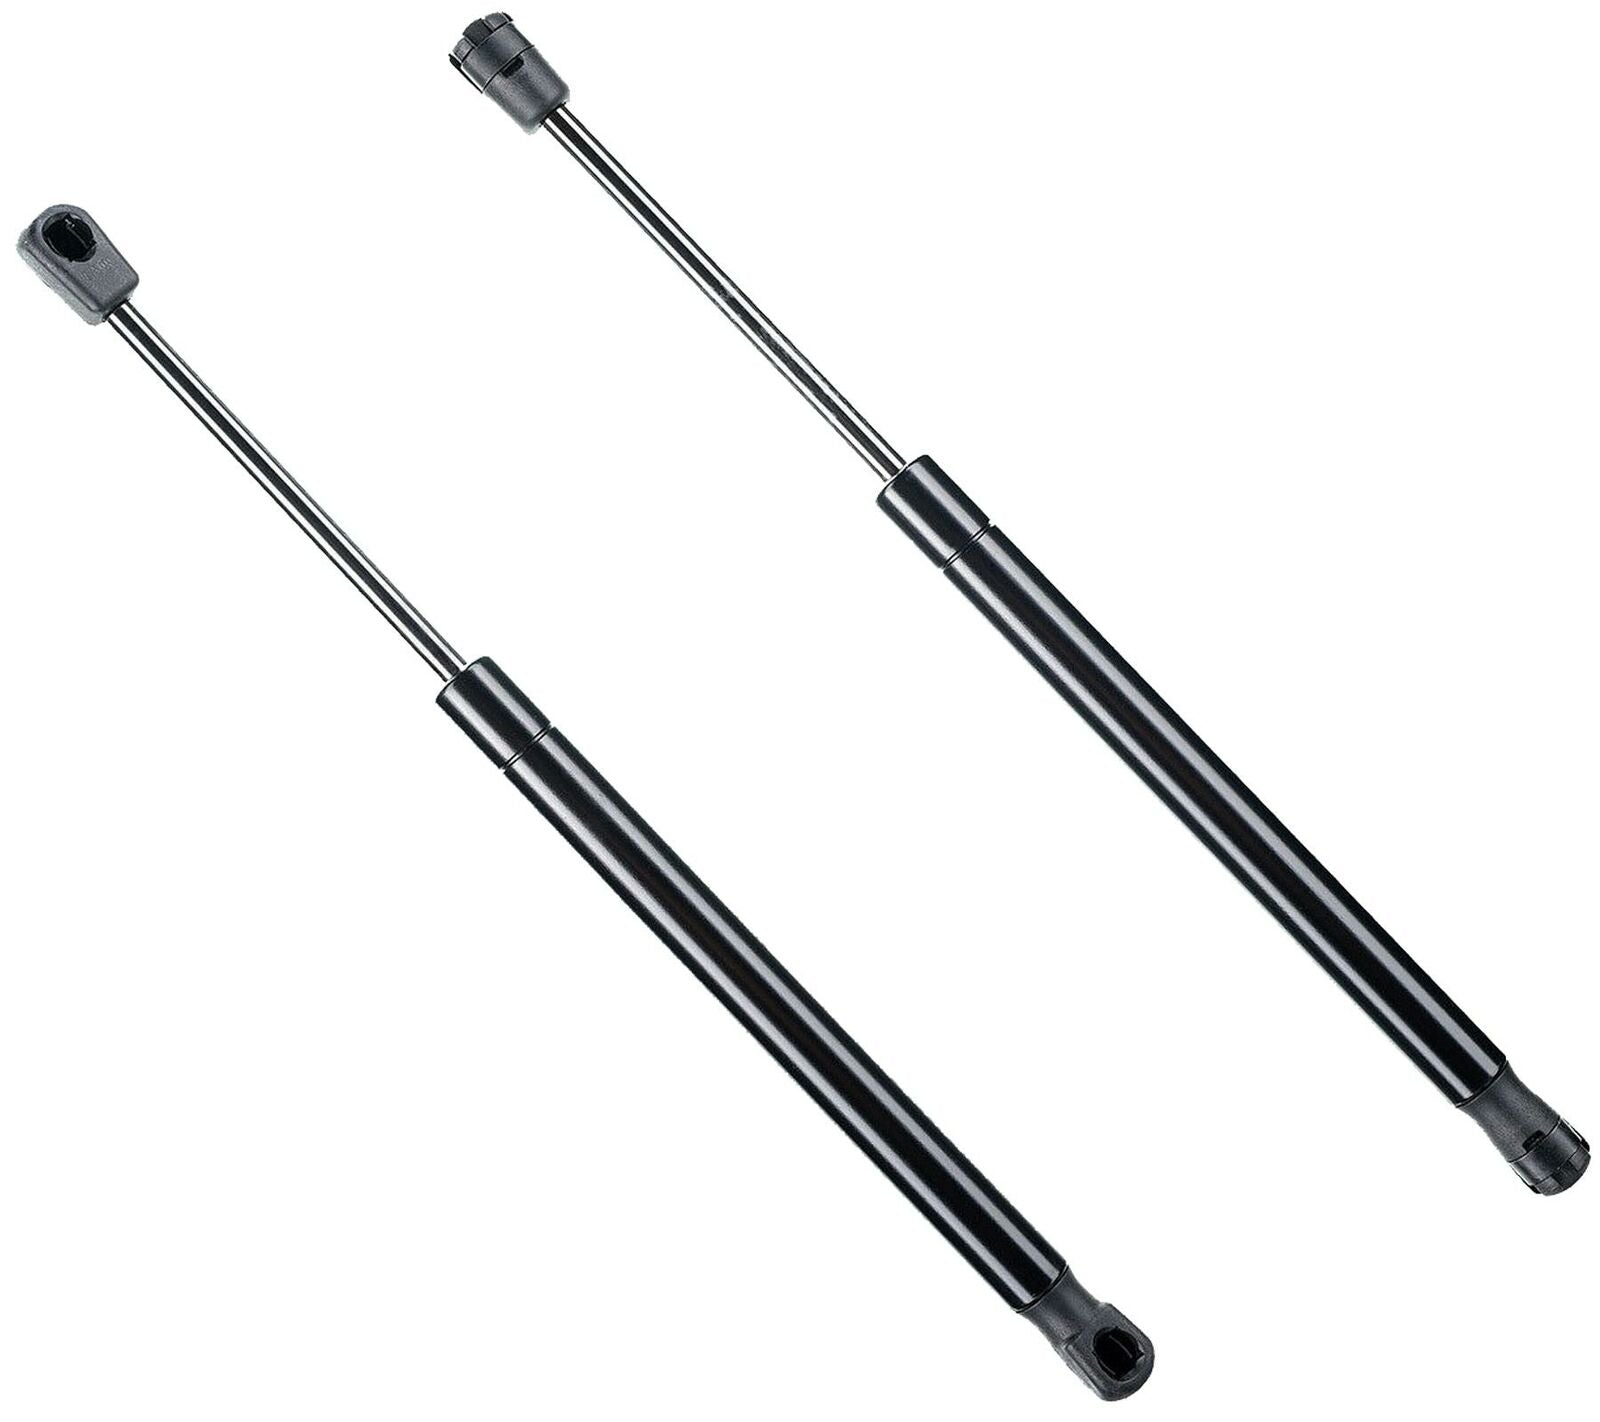 Pair Of Rear Tailgate Boot Struts Gas Fits Seat Alhambra 7V8 7V9 1K8827550A